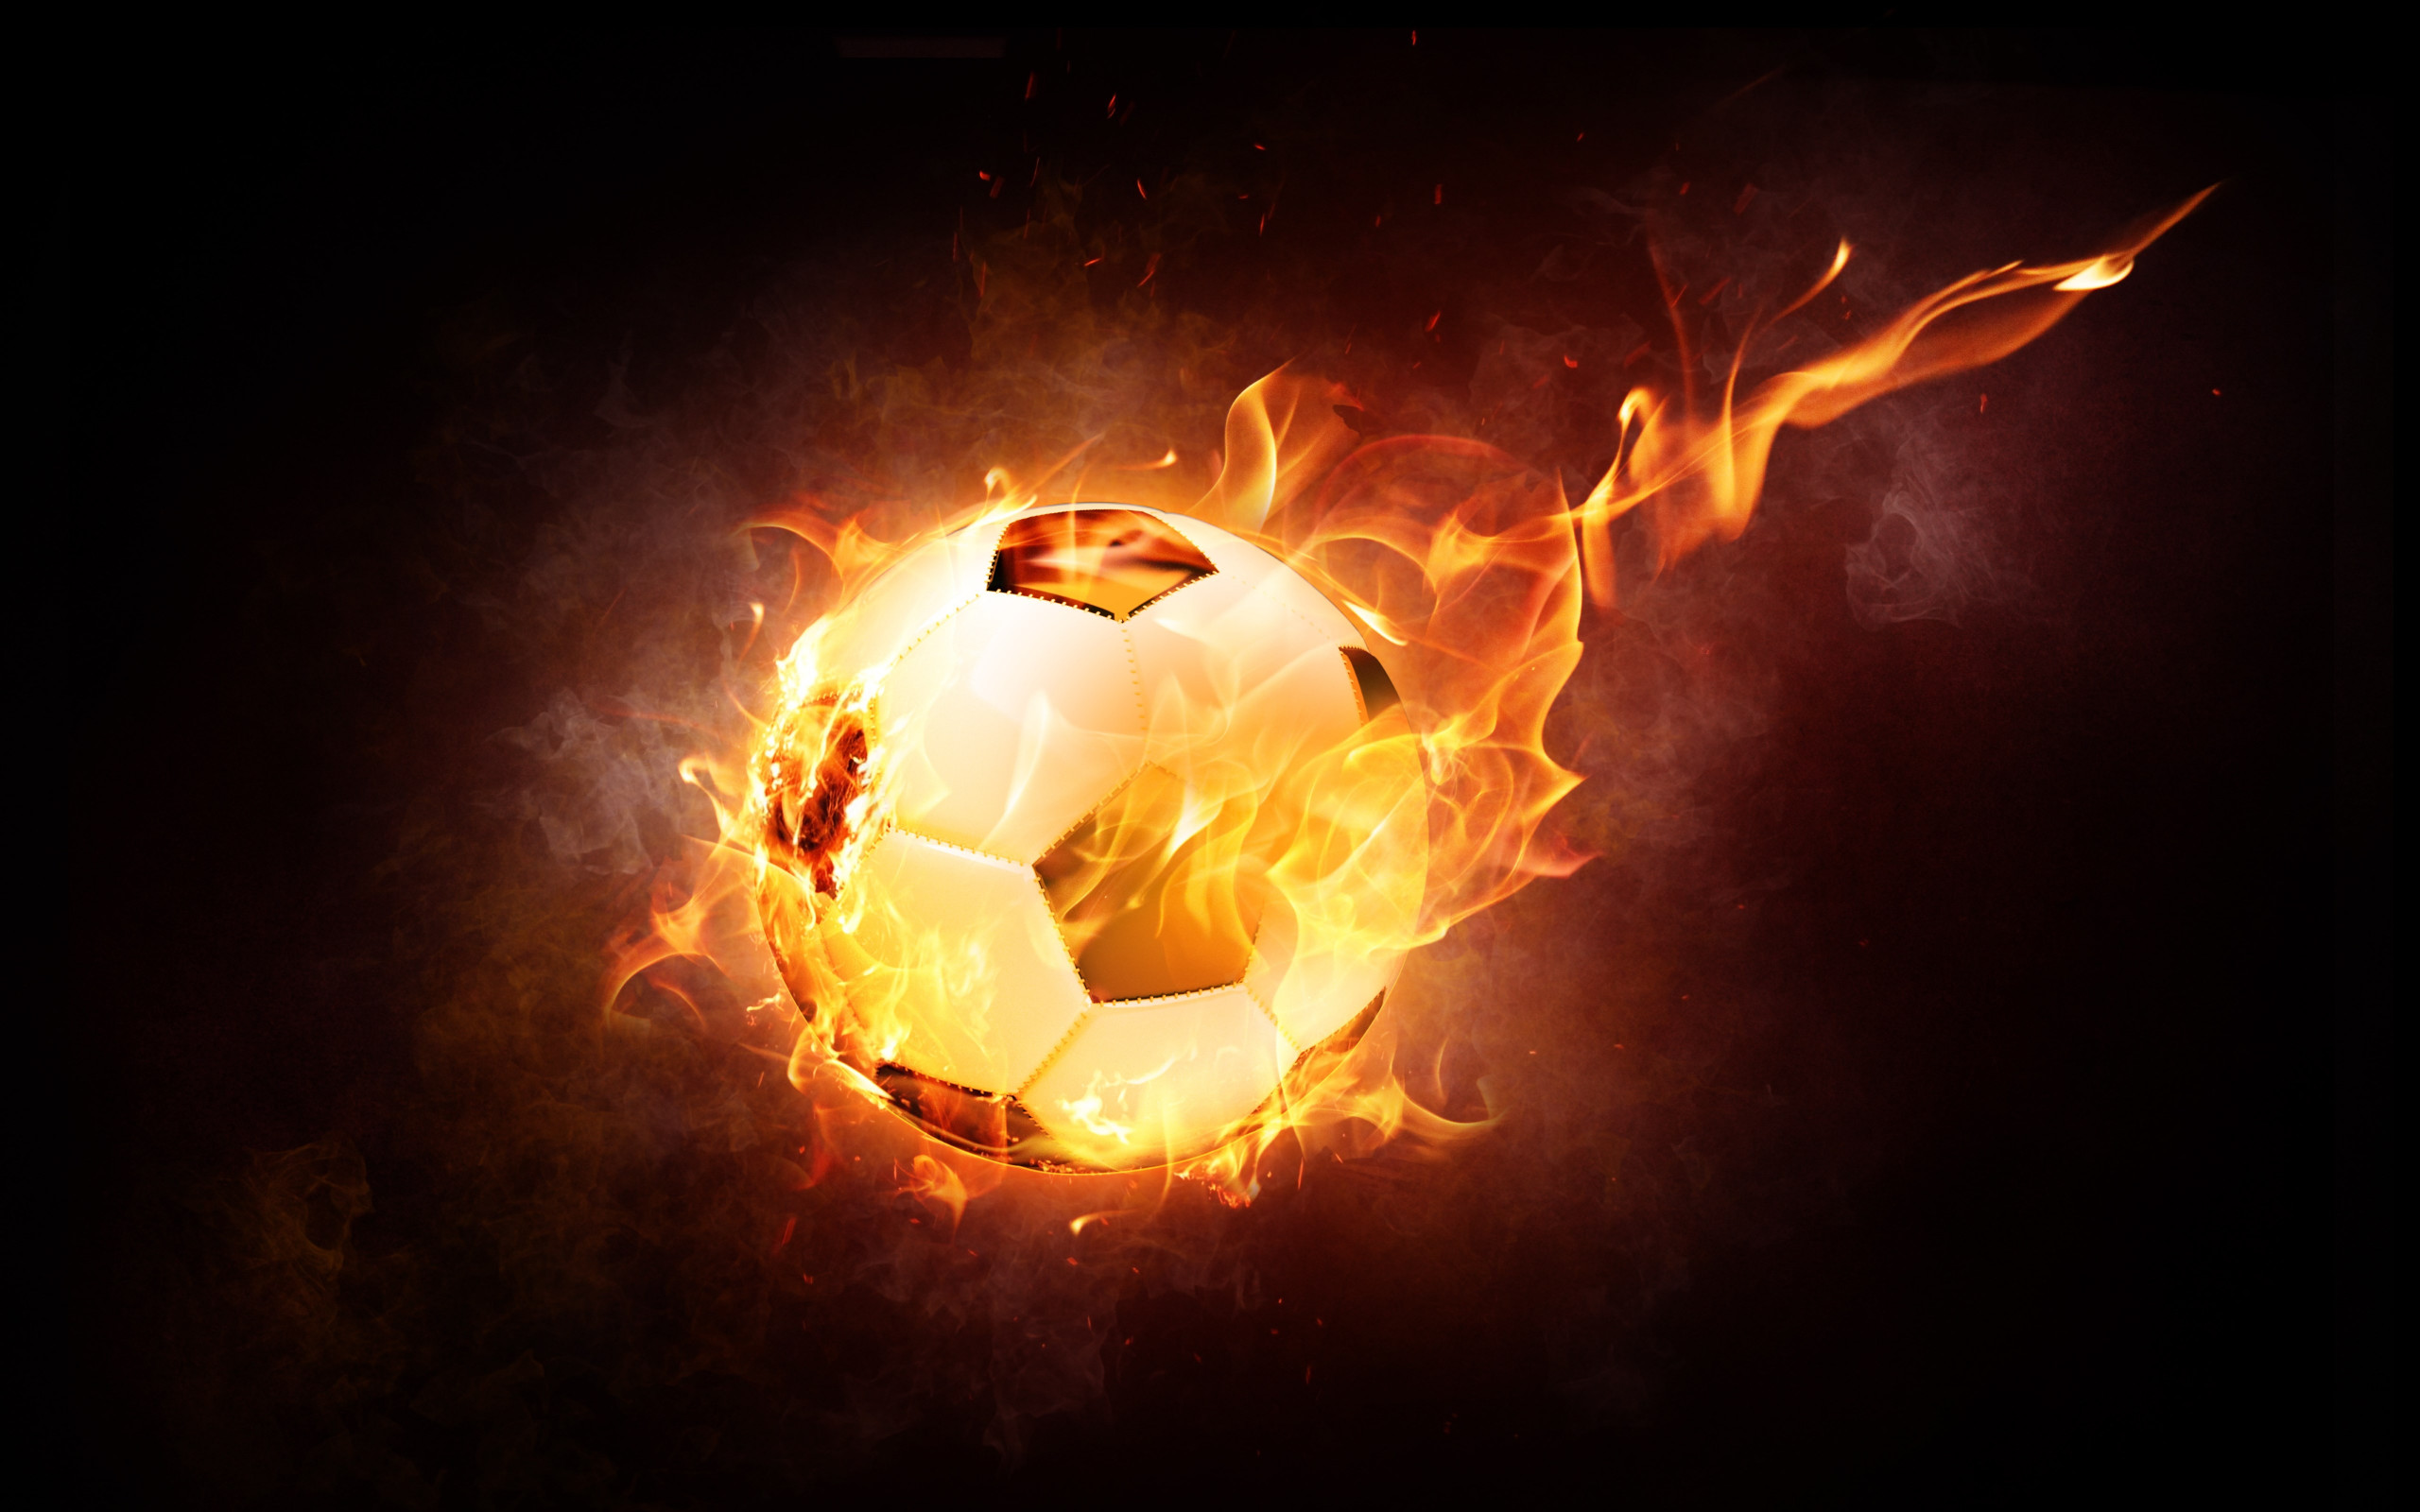 The football ball is on fire wallpaper 2560x1600